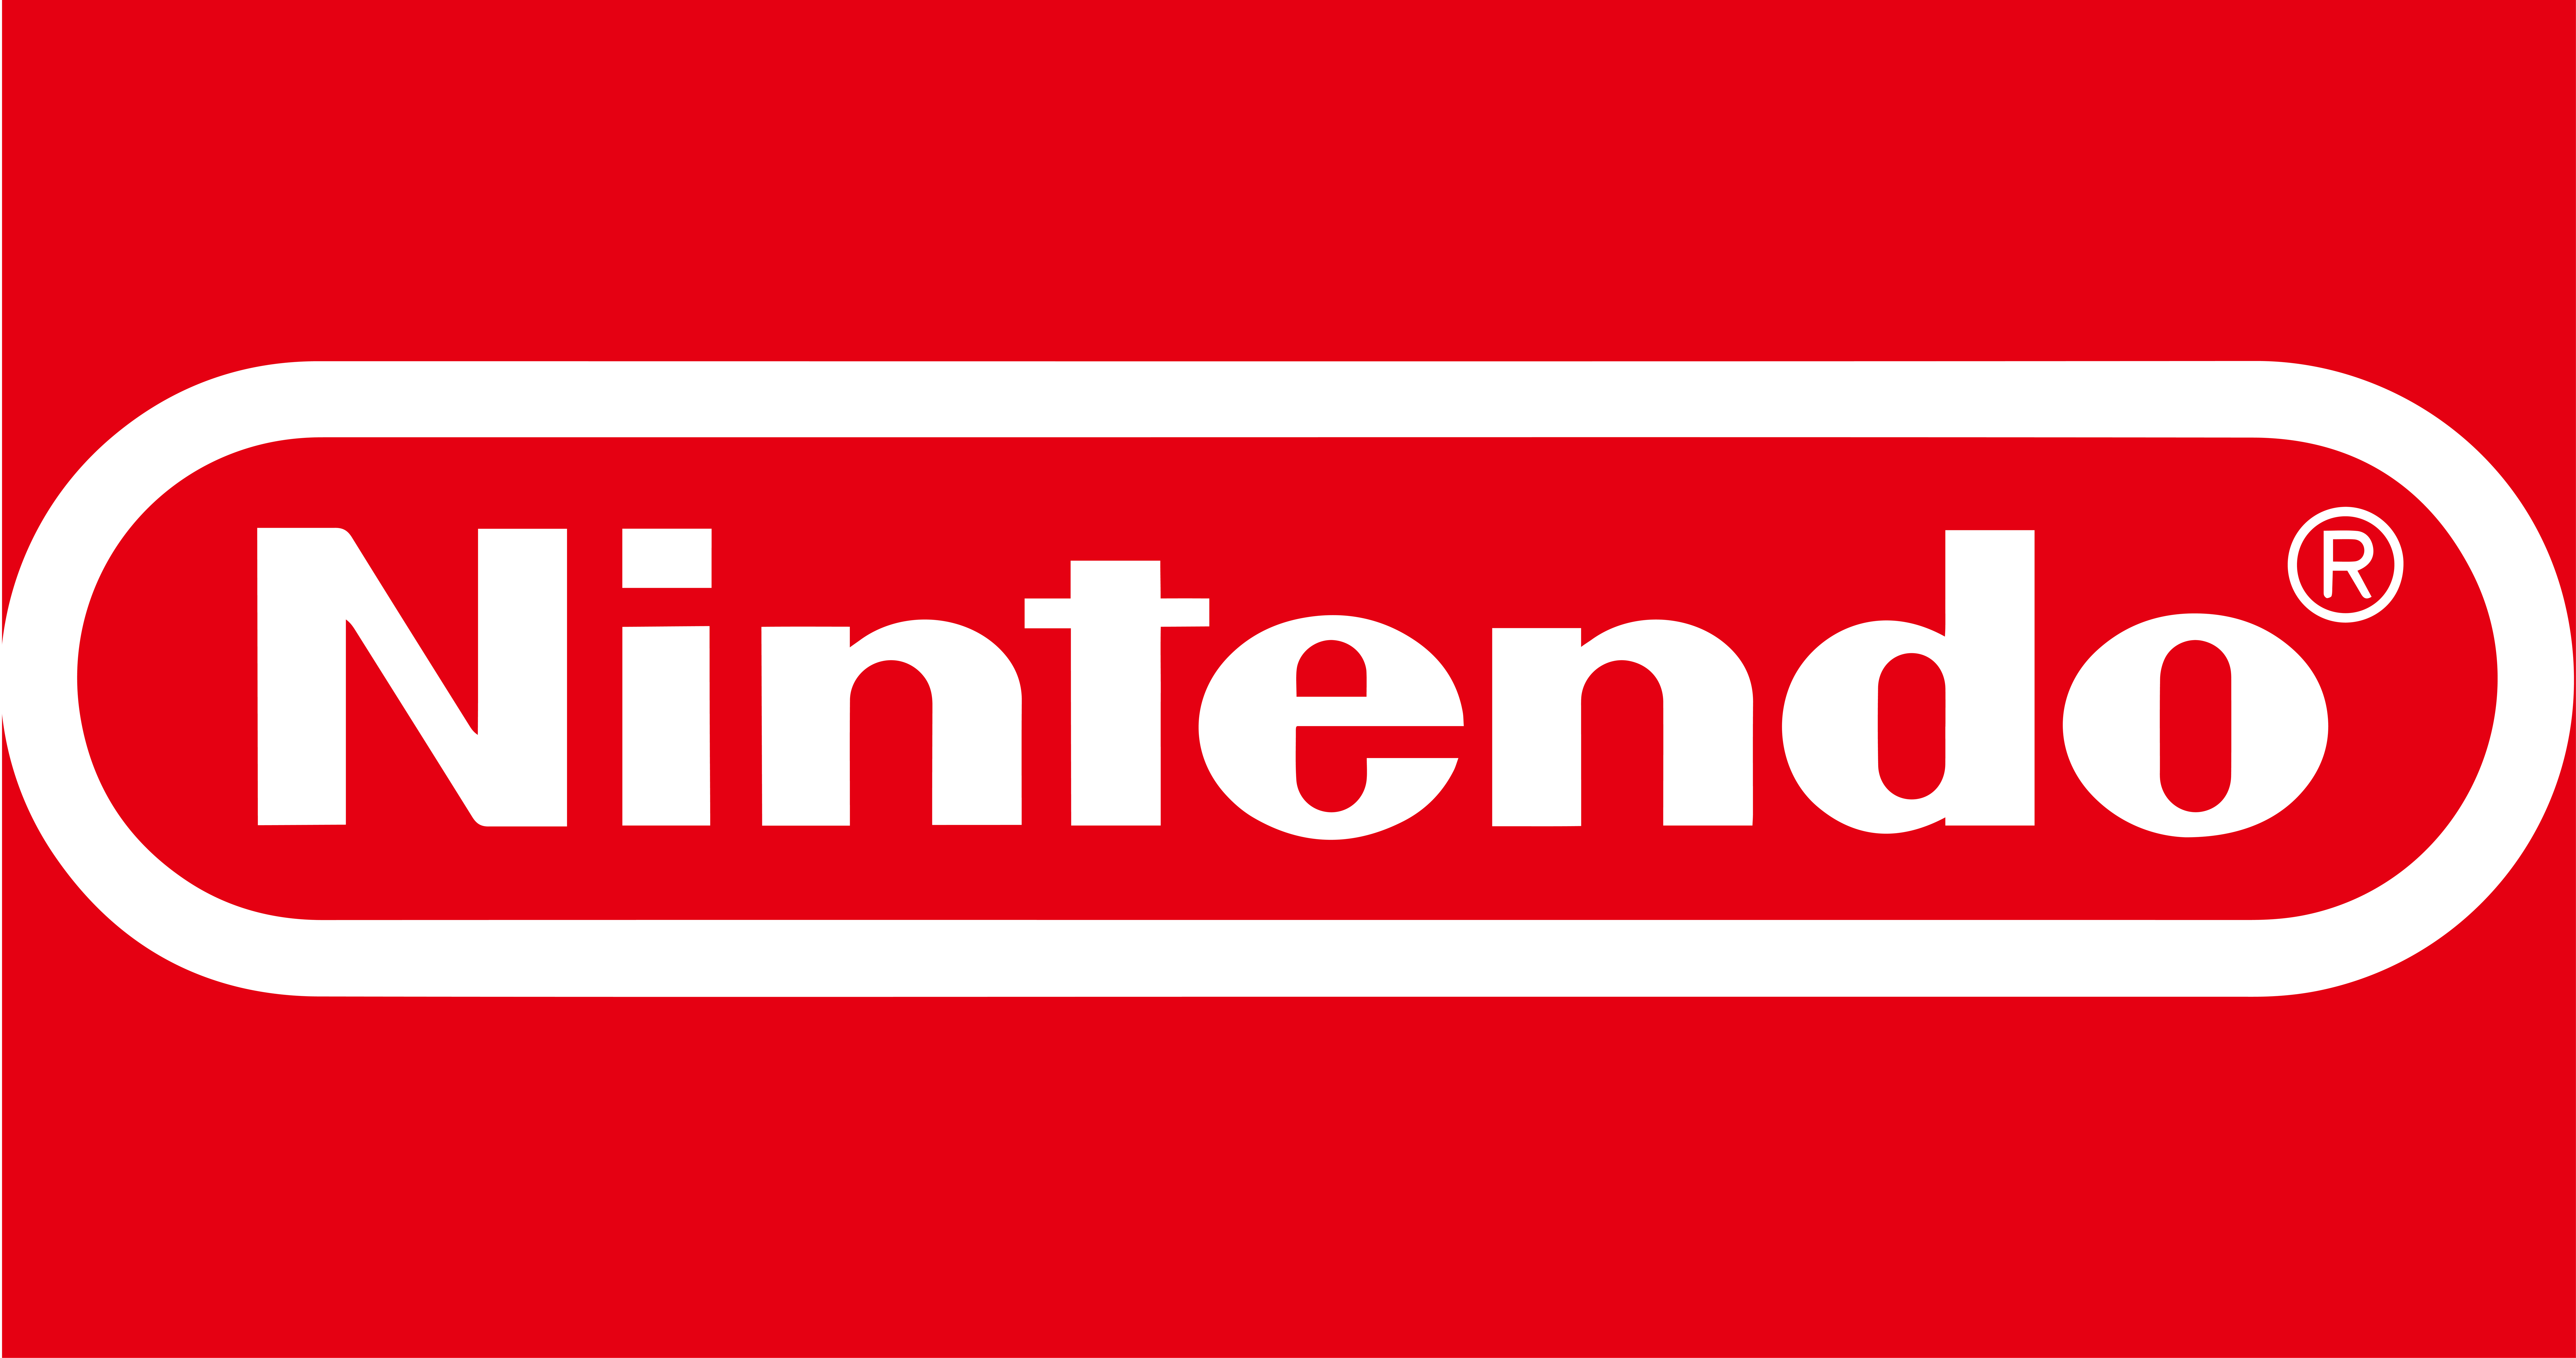 General 17081x9001 Nintendo brand red background video games